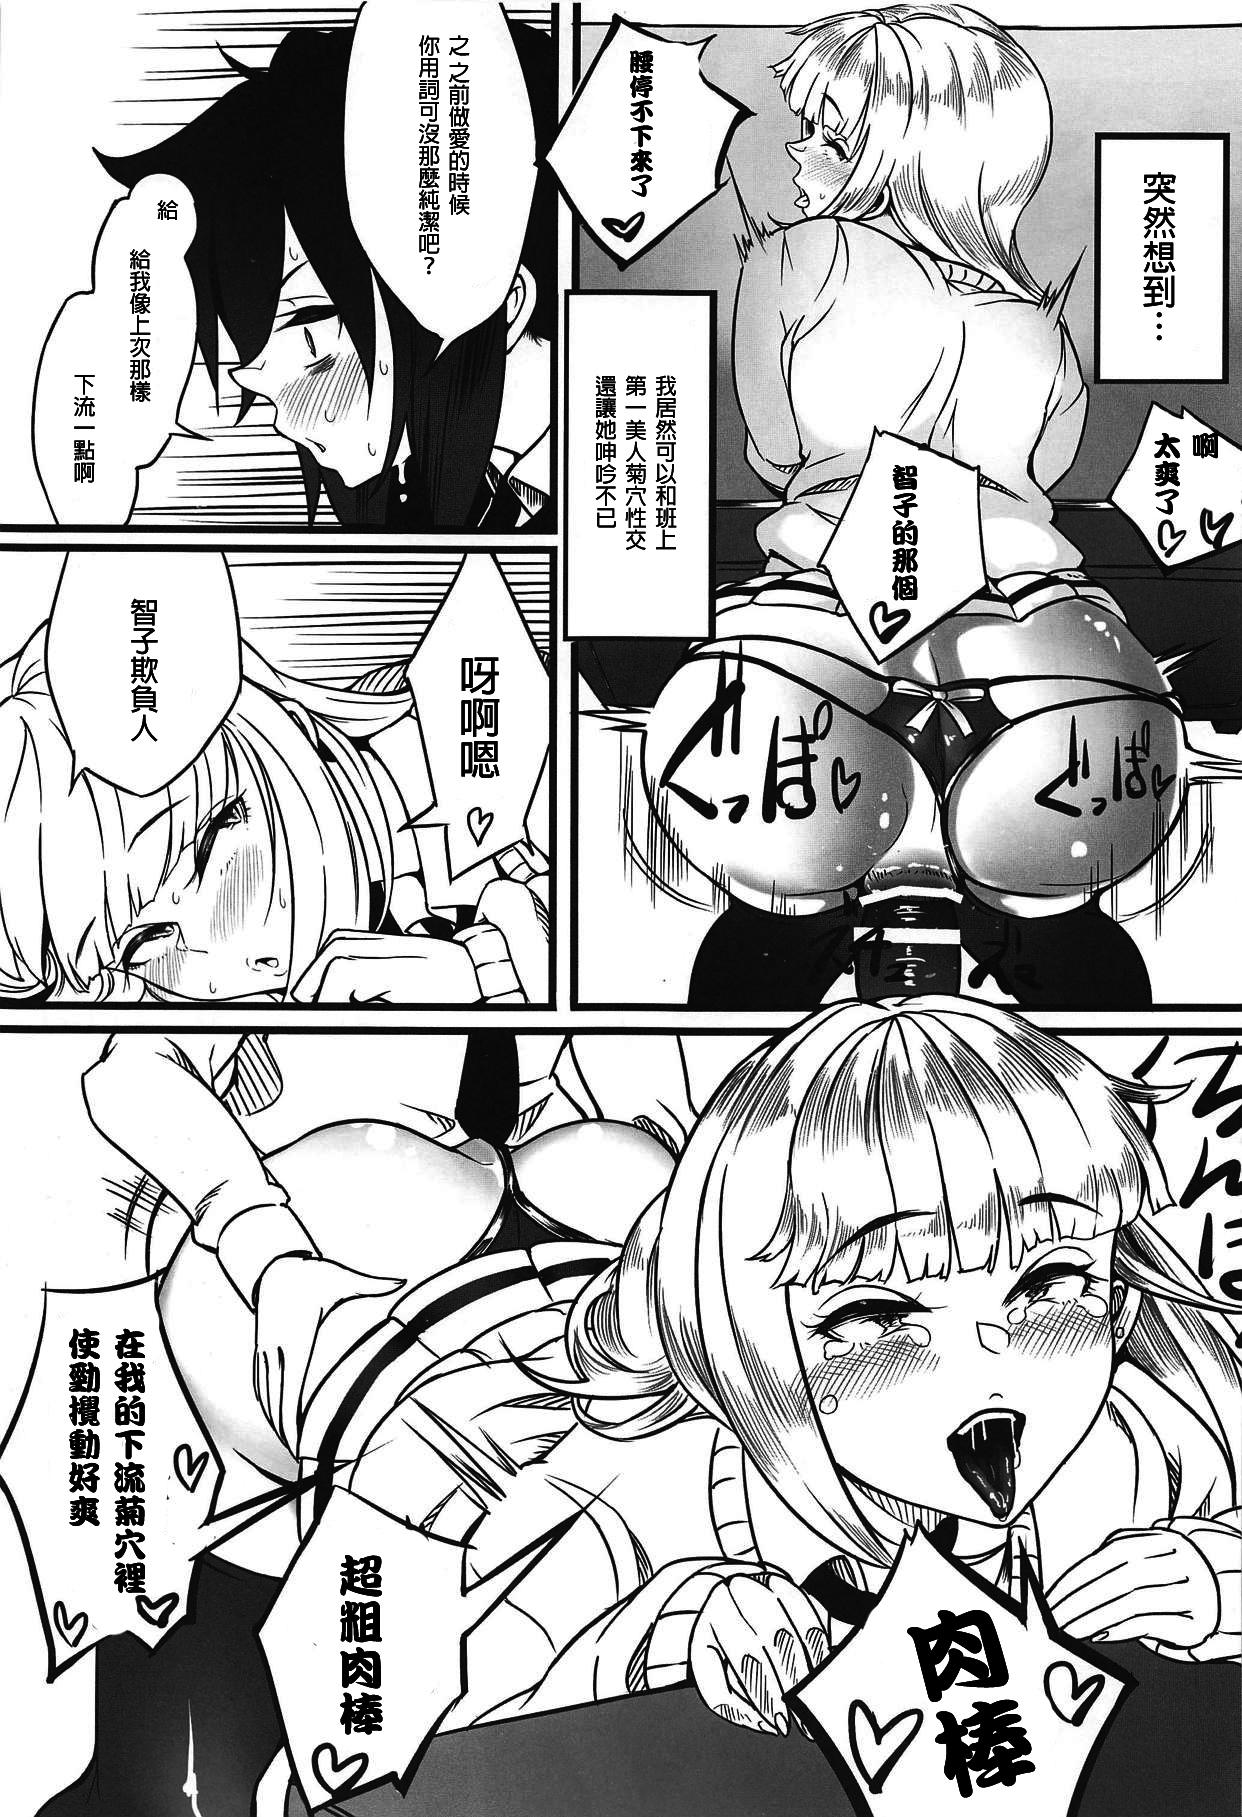 Neighbor Yuri-chan to Asobo 丨也和百合一起玩嘛 - Its not my fault that im not popular Ftvgirls - Page 9